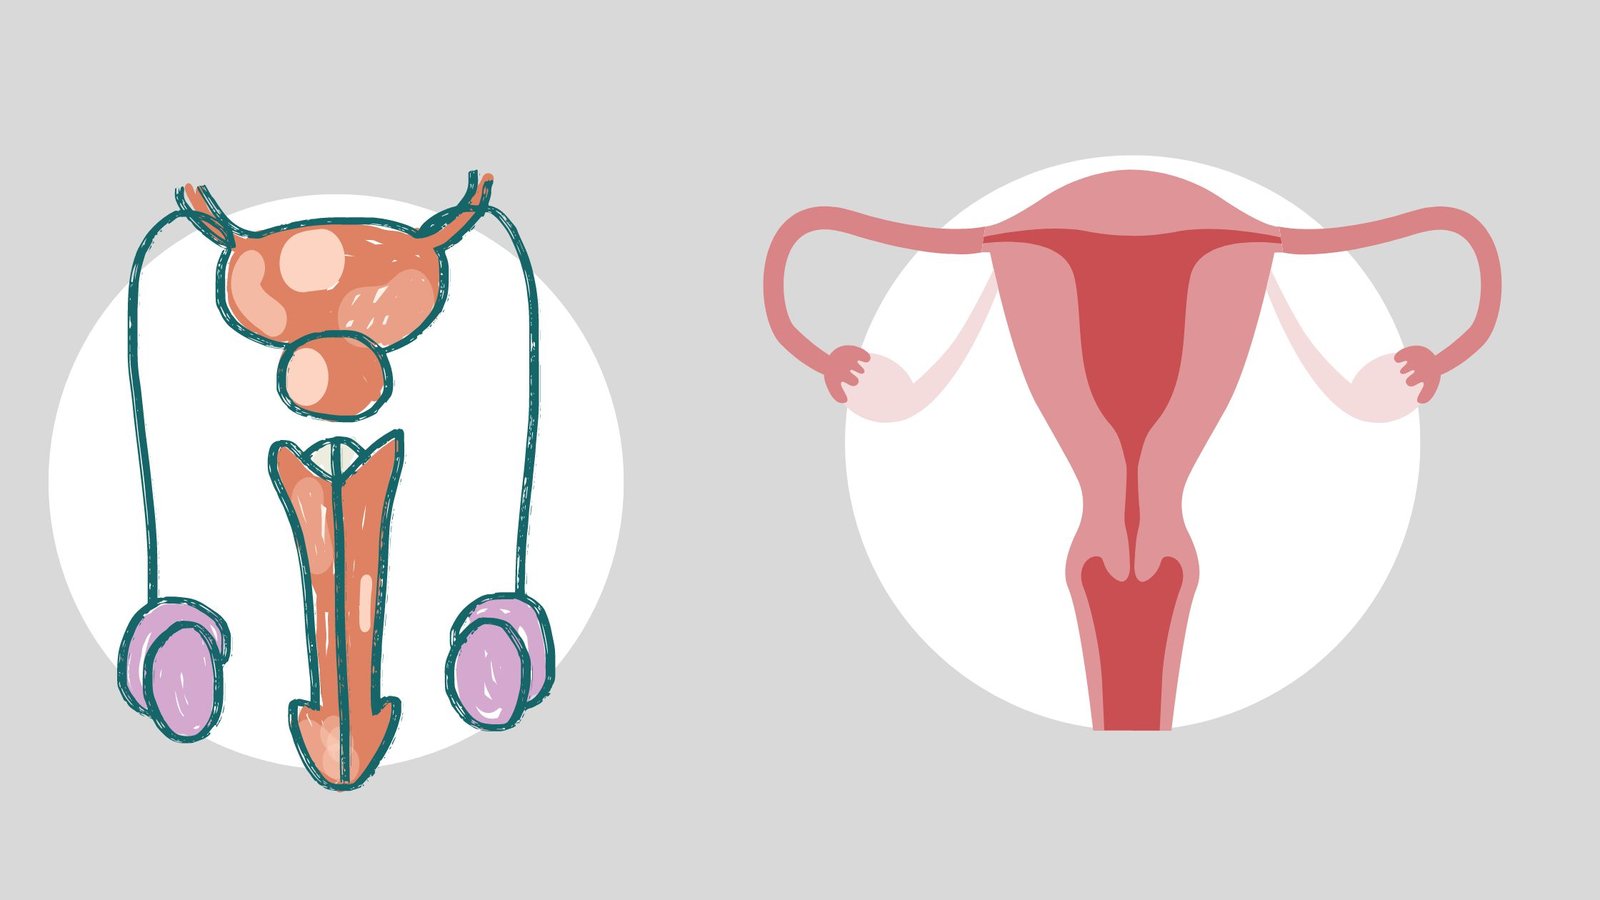 Reproductive System - Development and Differentiation